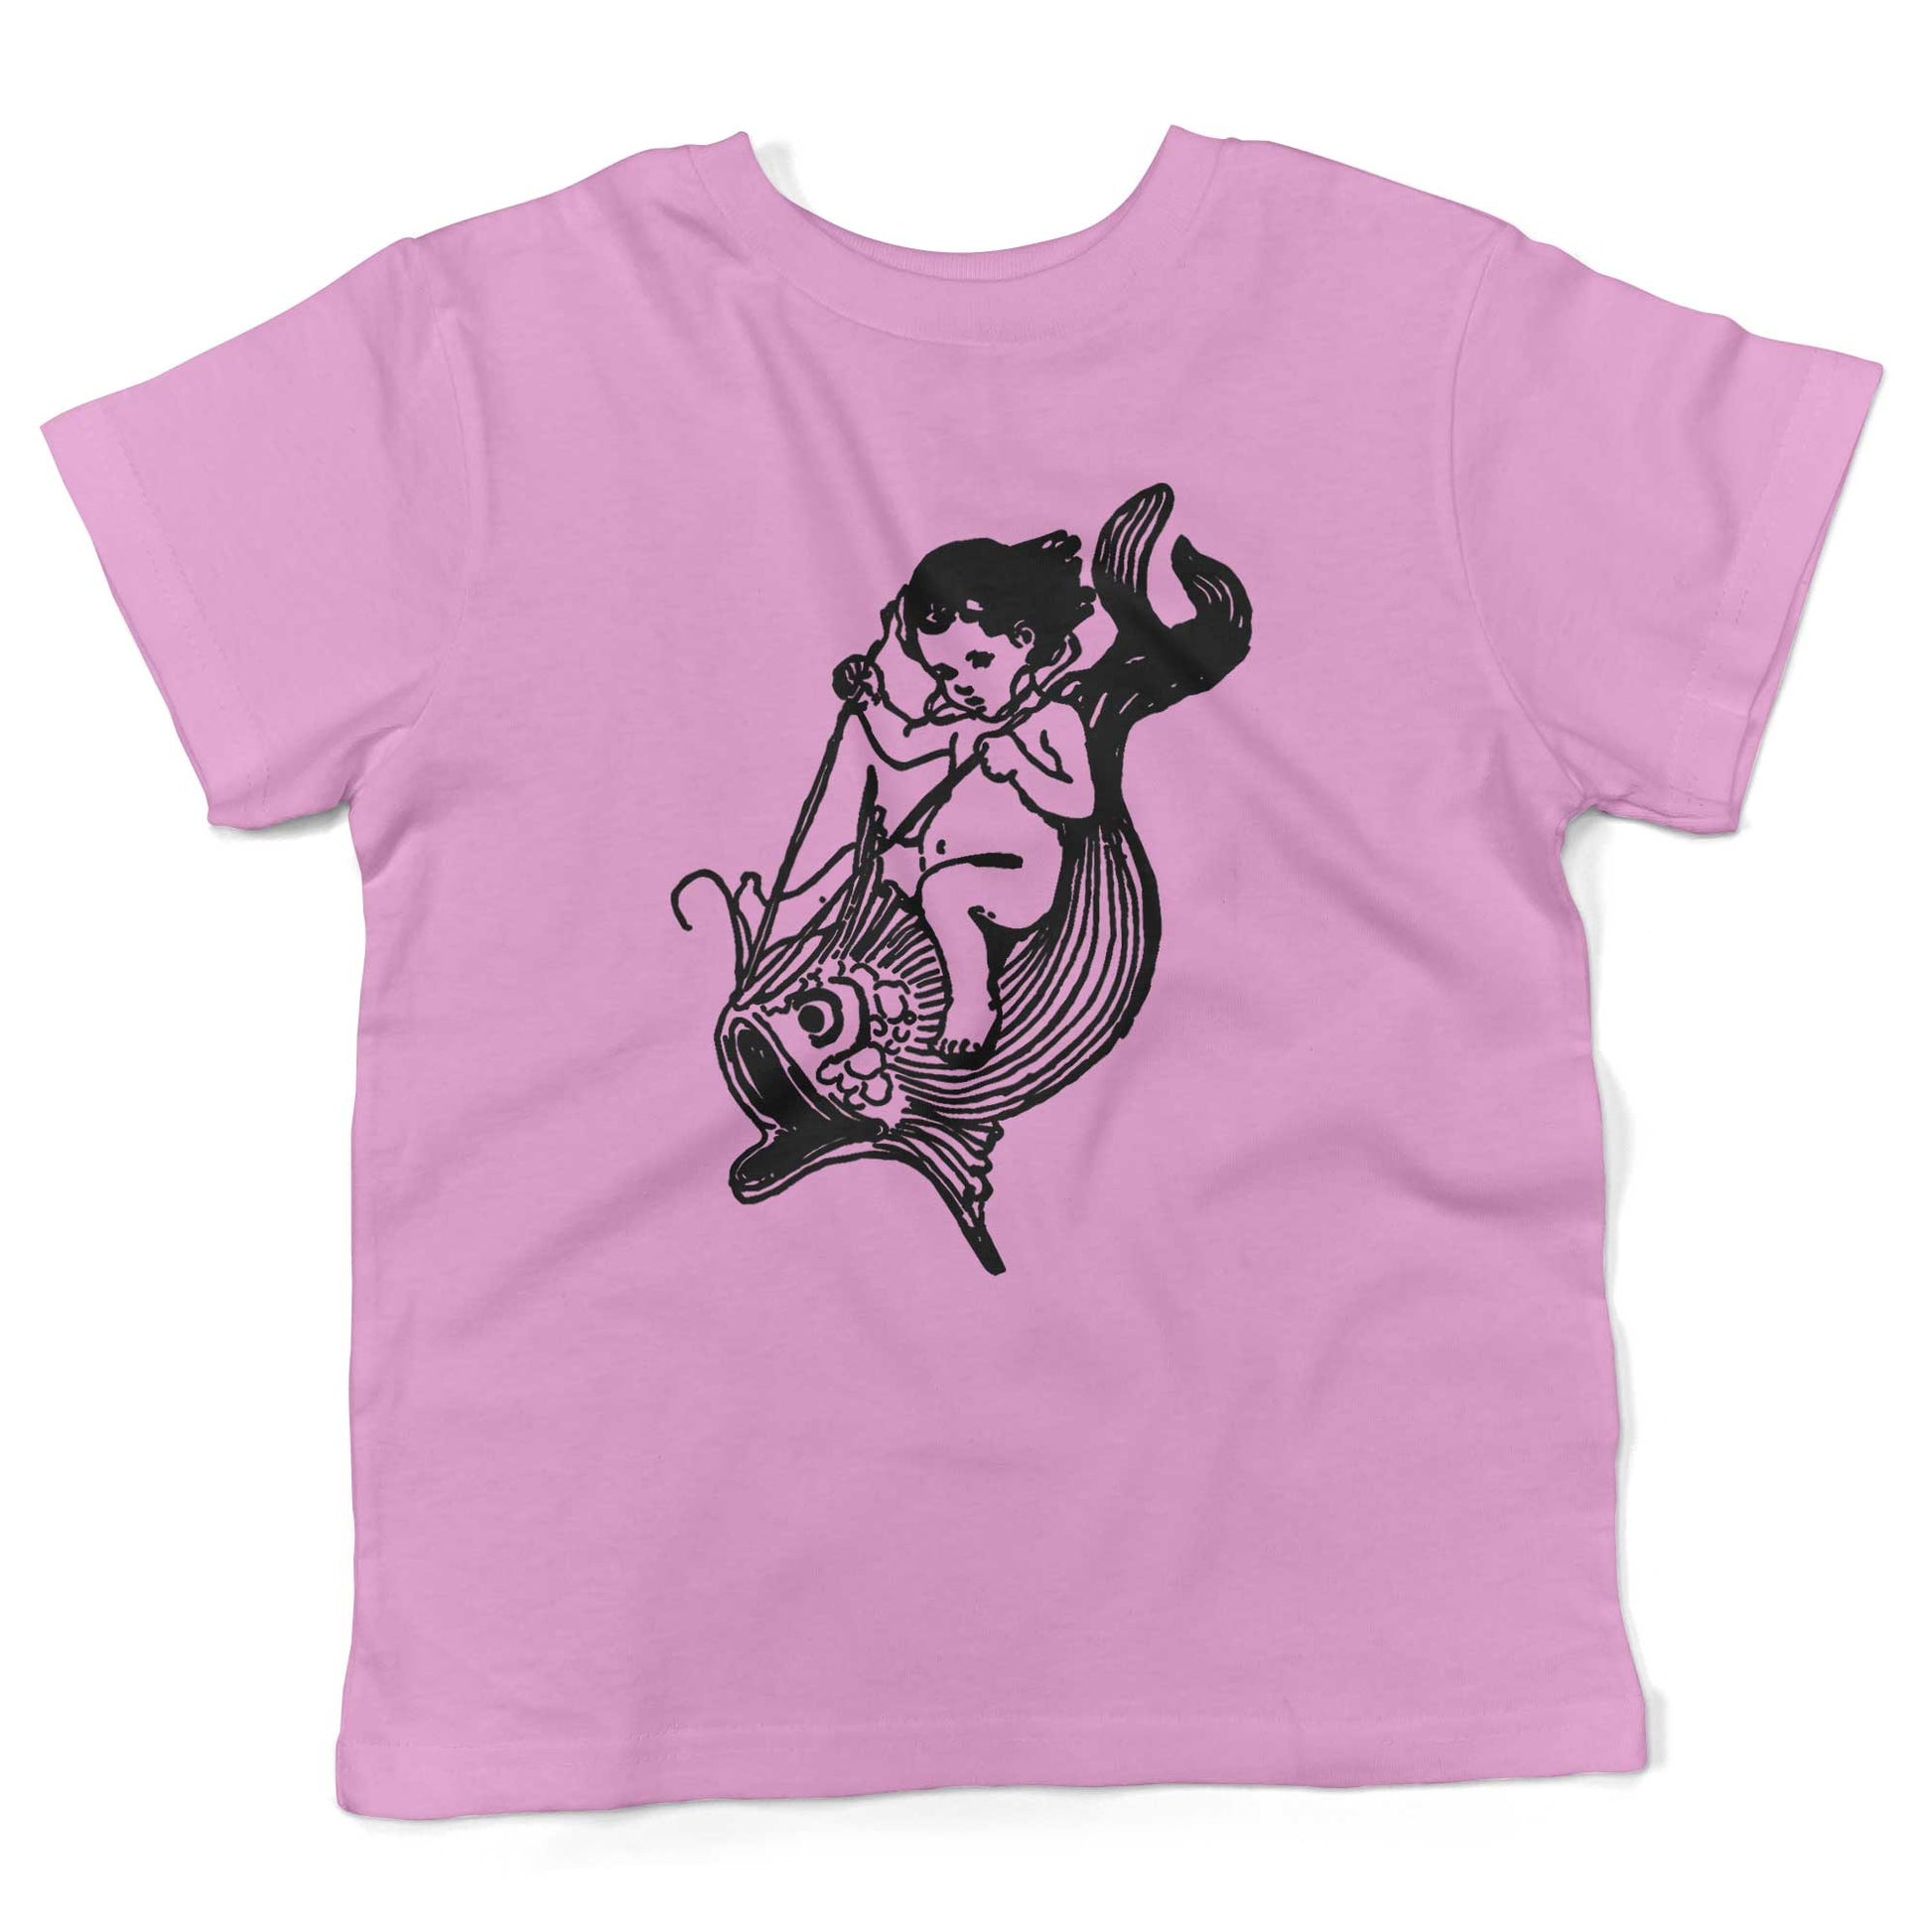 Water Baby Riding A Giant Fish Toddler Shirt – Baby Wit